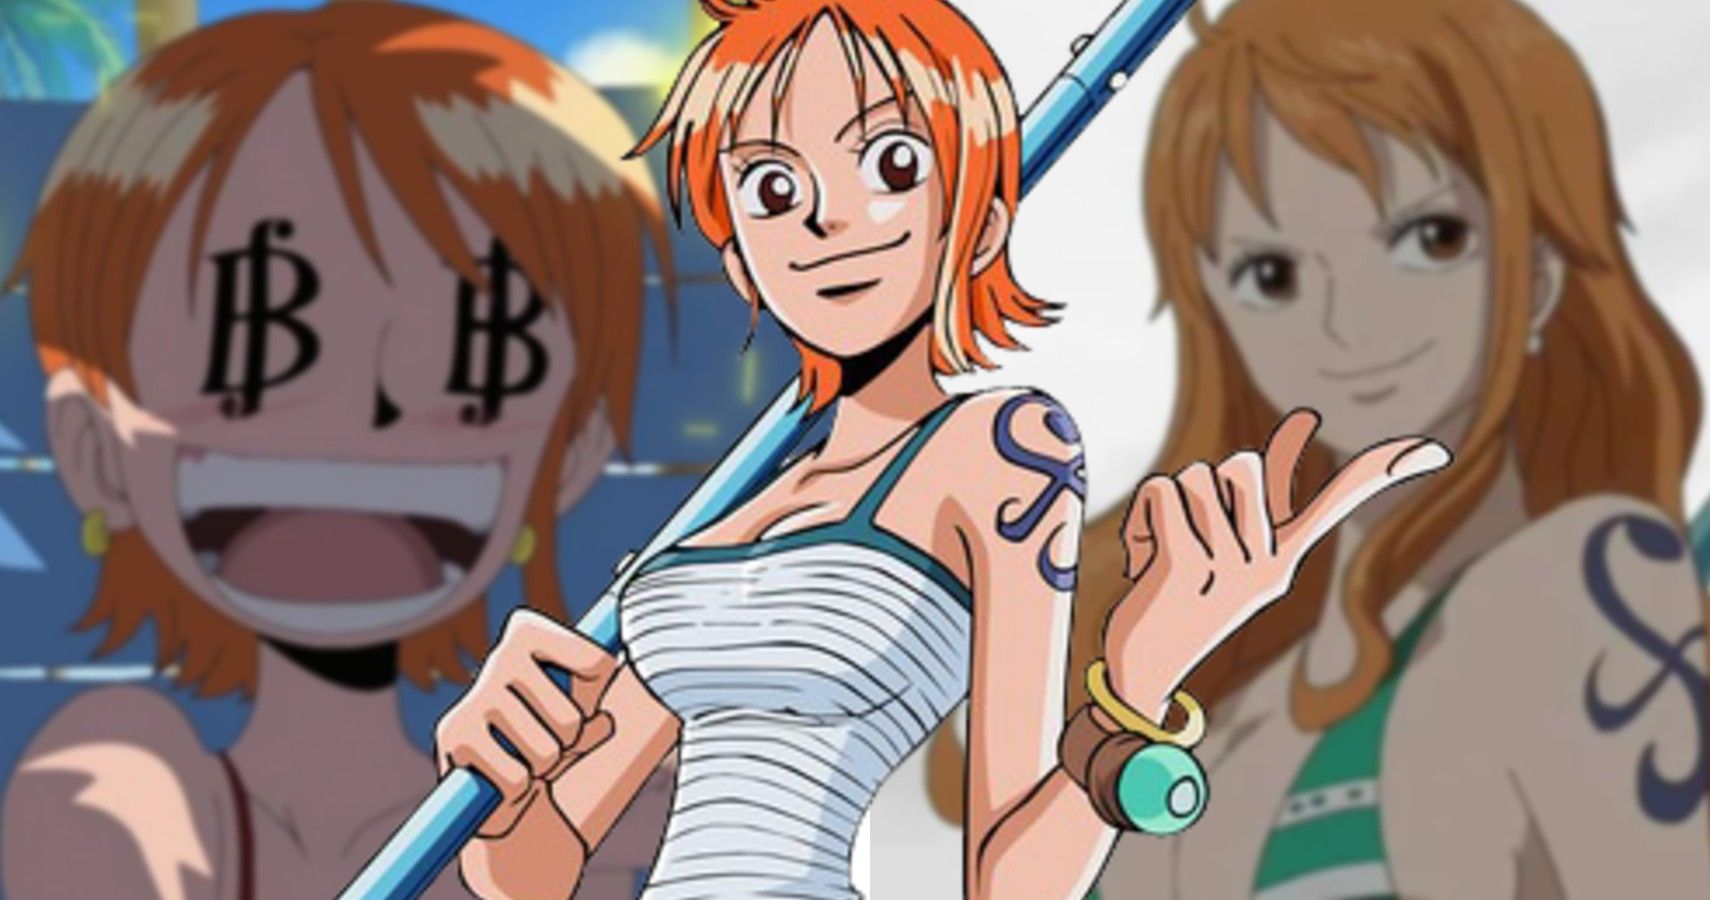 Nami One Piece - Nami is a pirate and the navigator of the straw hat pirate...